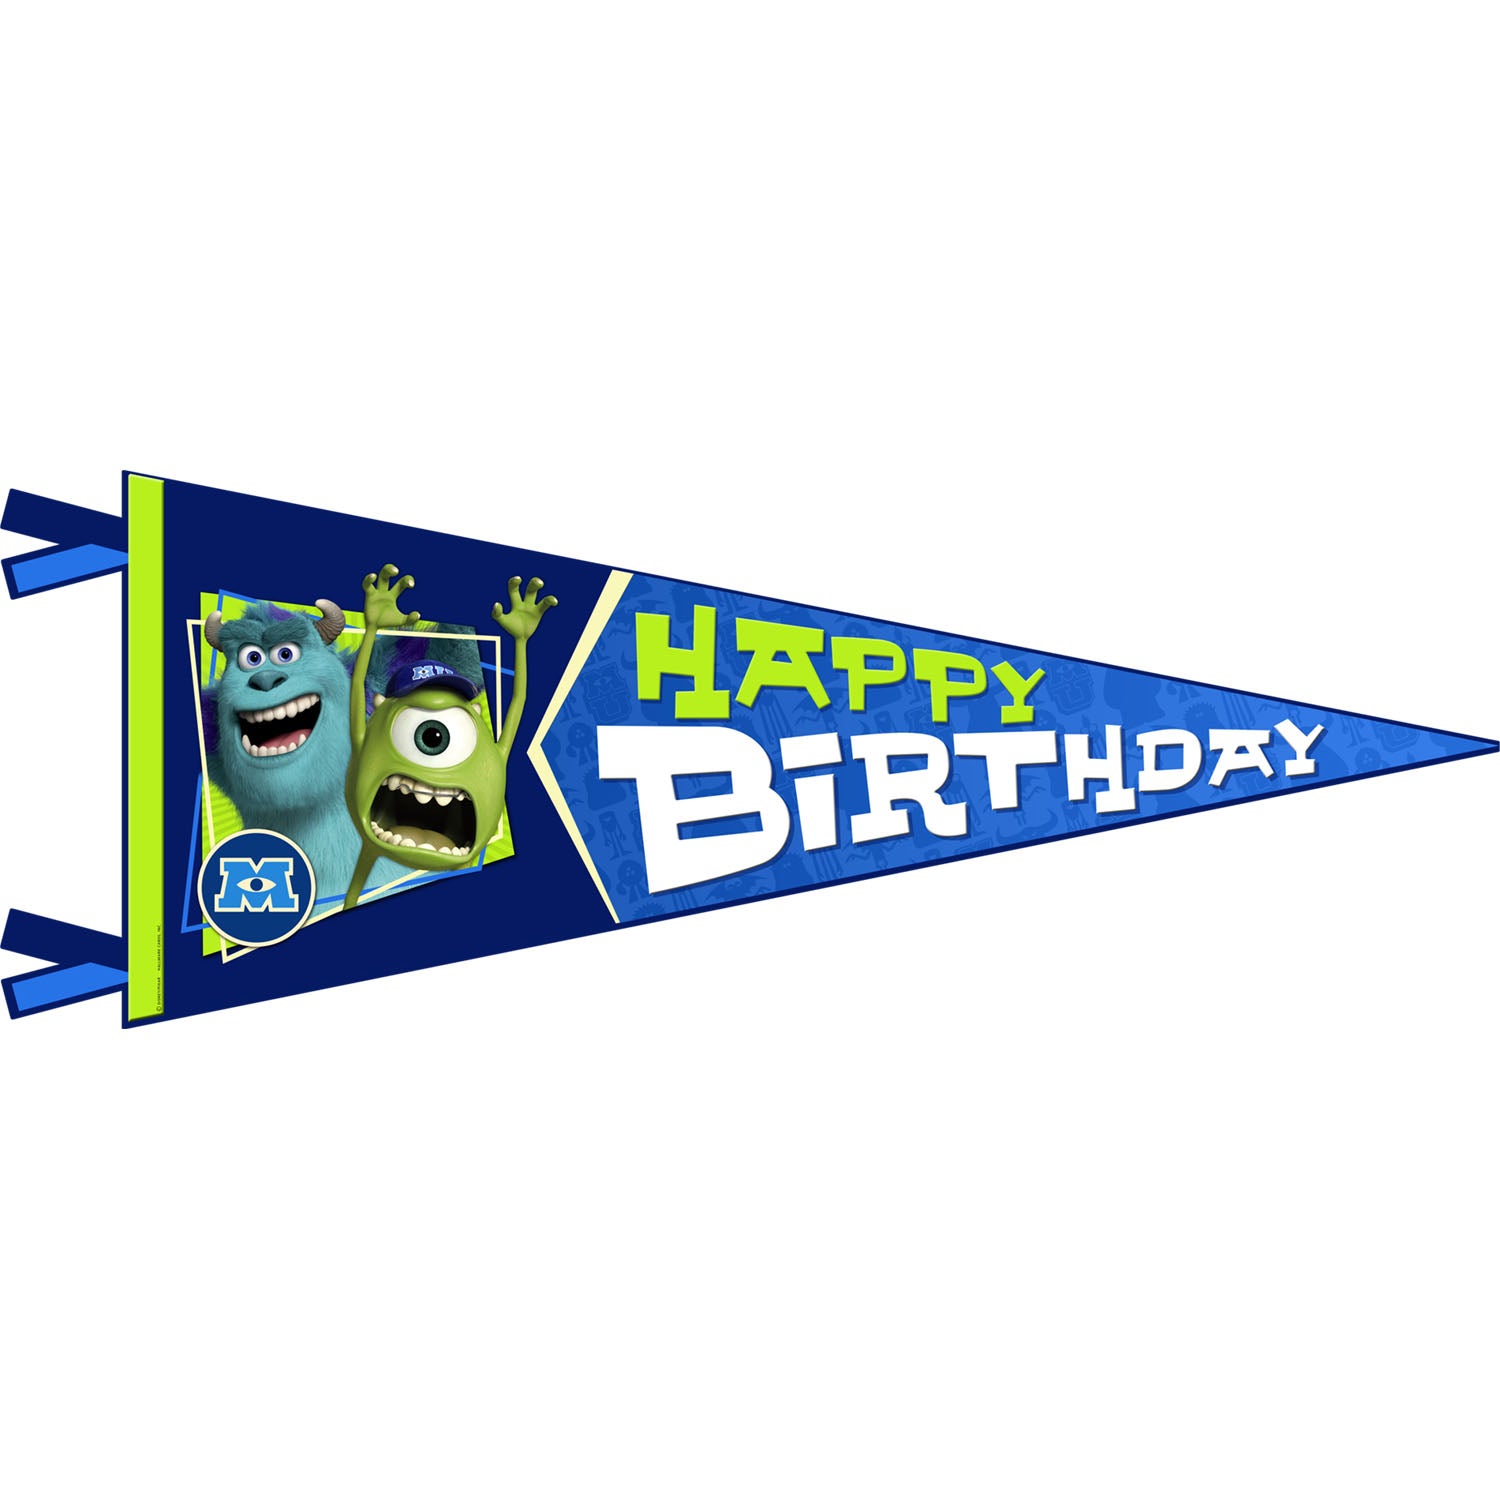 Monsters University Party Supplies - Monsters University Birthday Banner